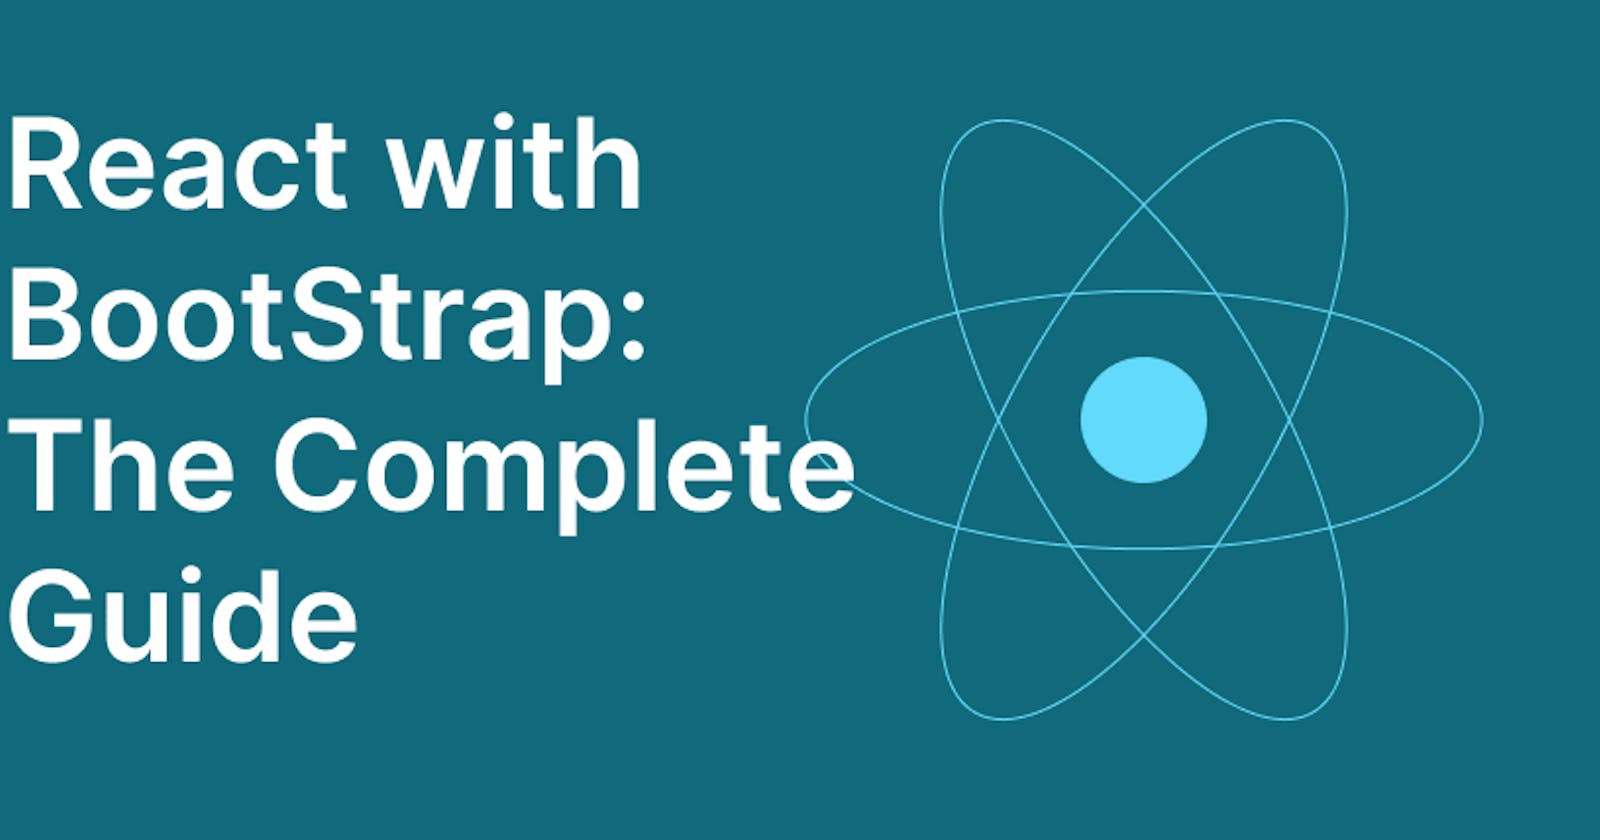 Bootstrap with React: The Complete Guide